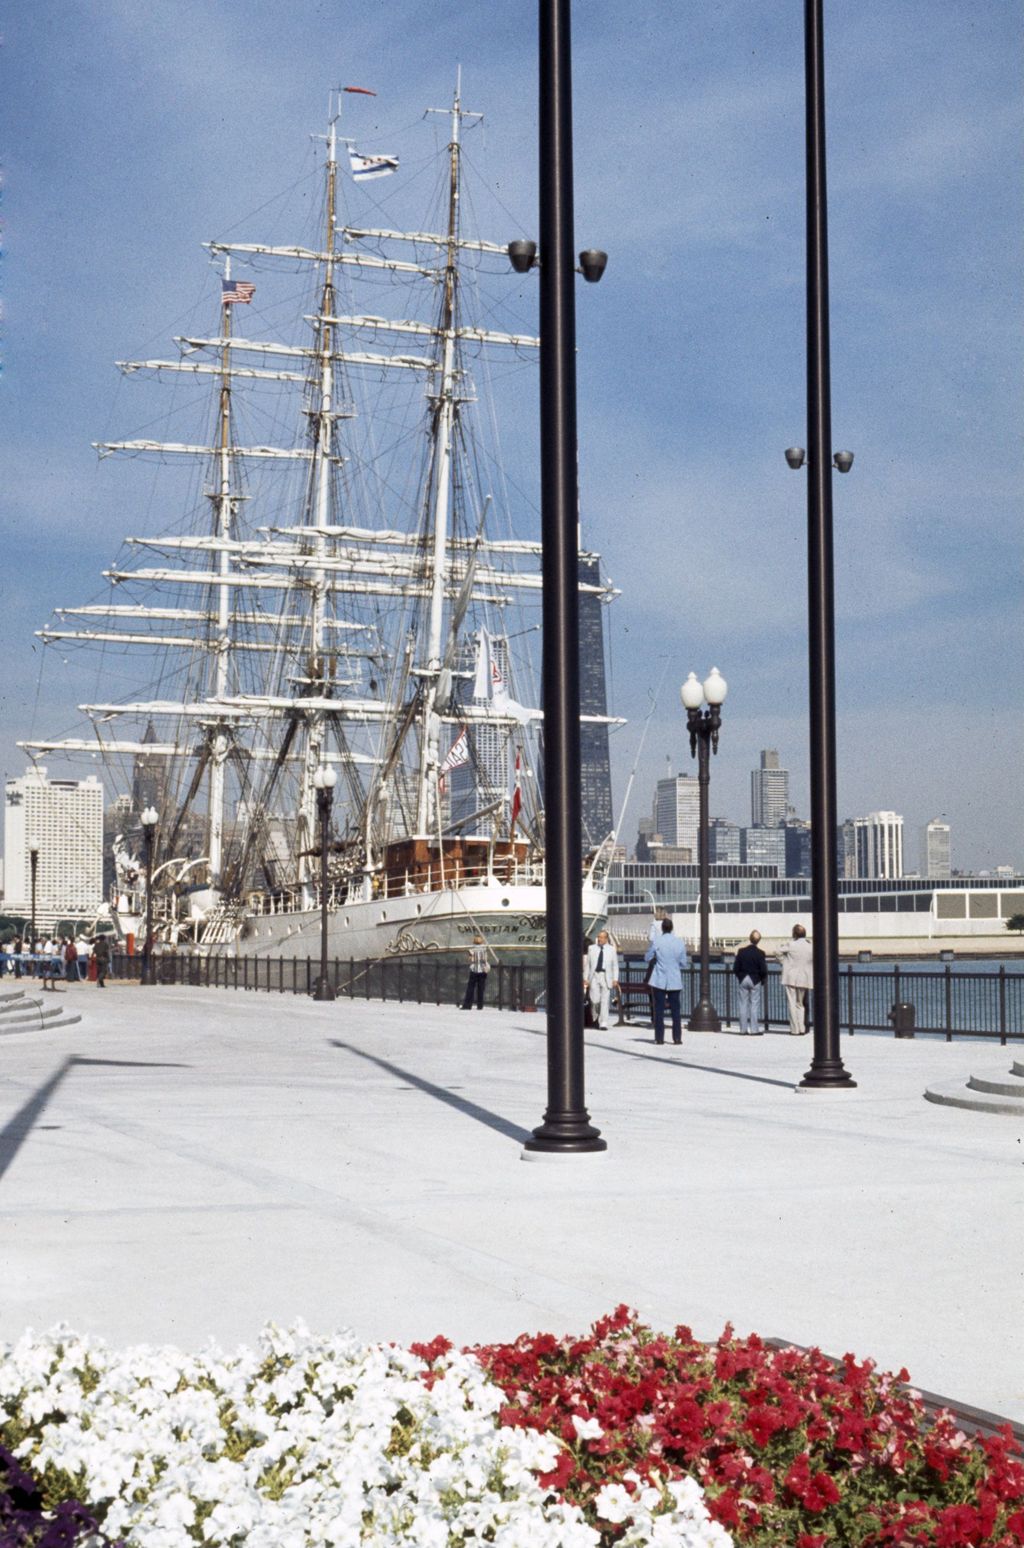 Miniature of The Christian Radich docked at Navy Pier